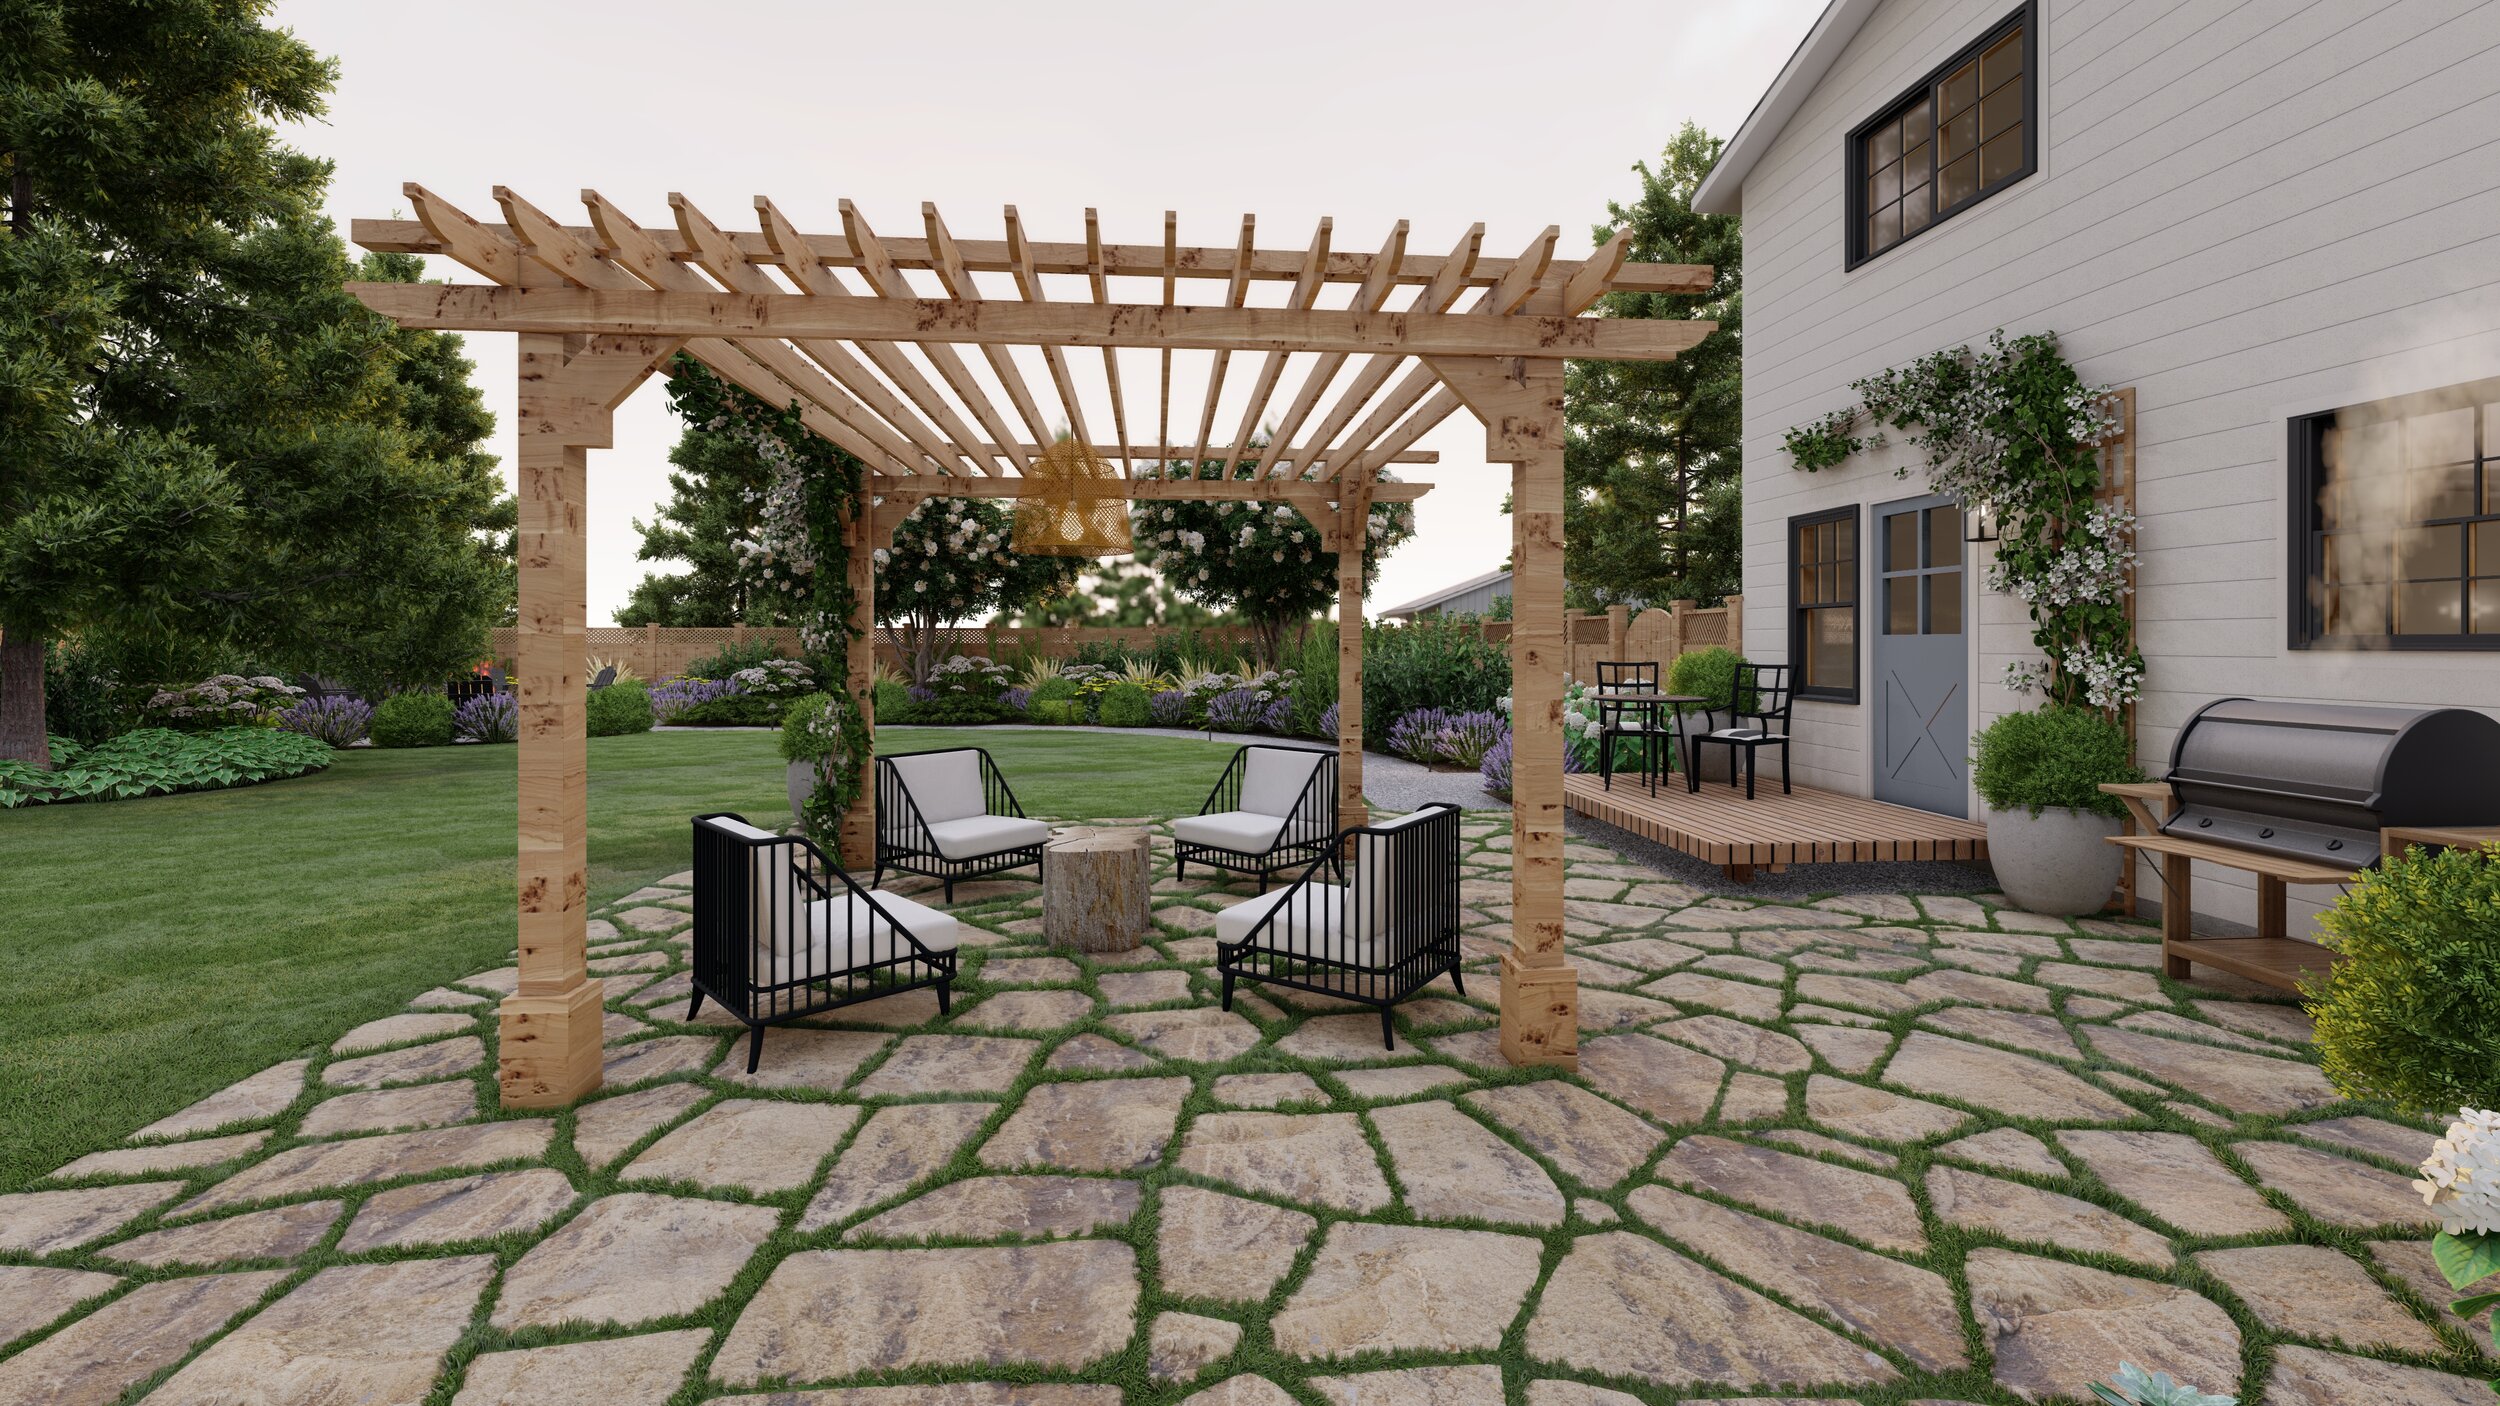 Backyard view of outdoor lounge area under wooden pergola near bbq grill